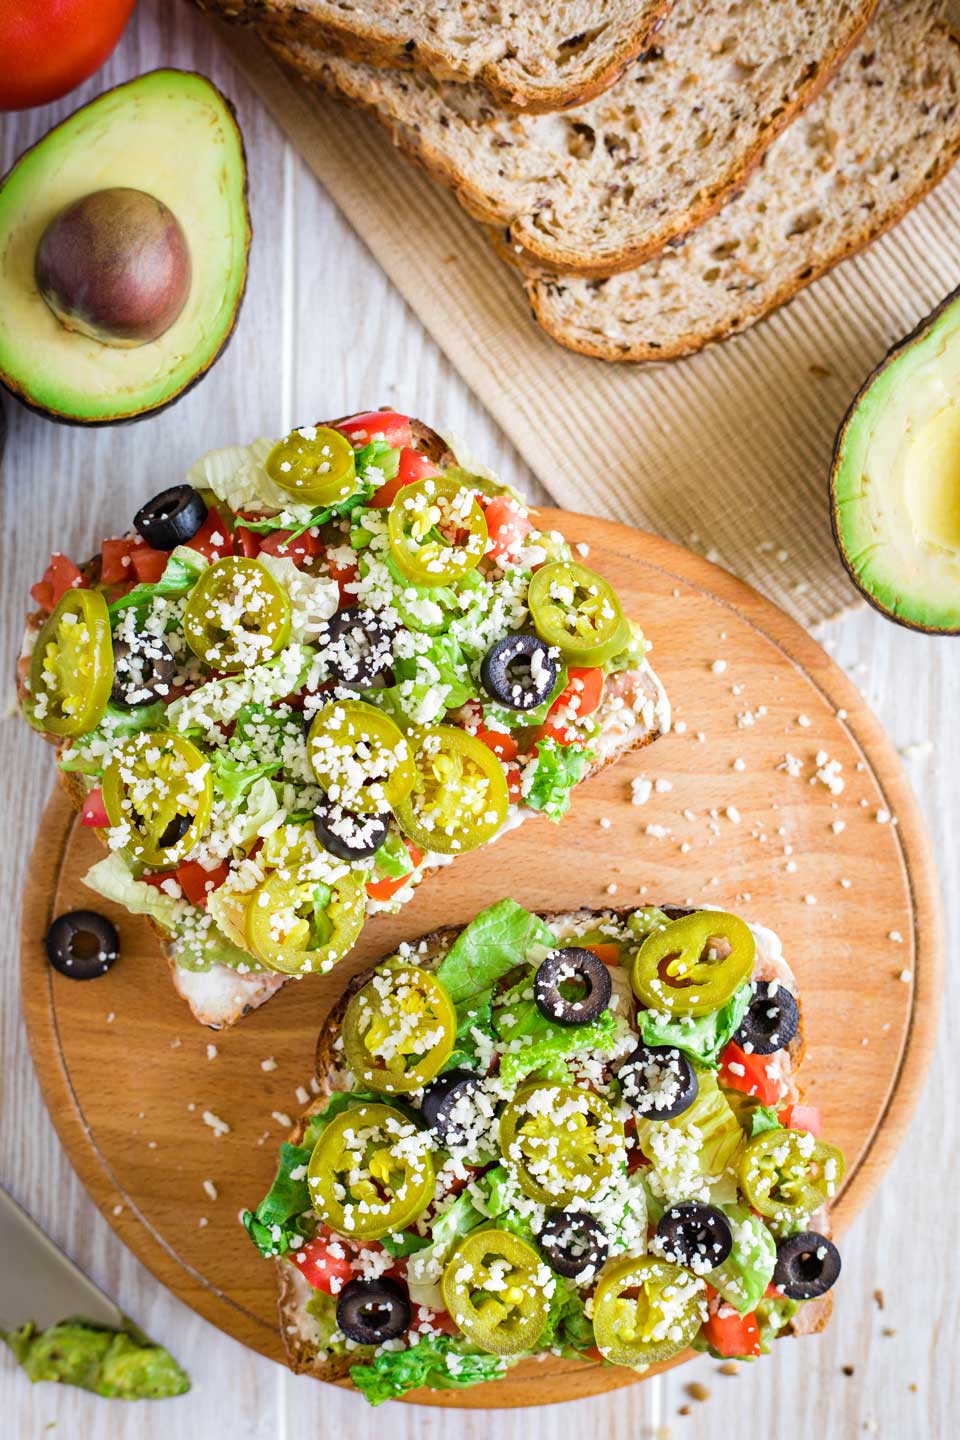 two pieces on one wooden platter, surrounded by a cut avocado, a tomato, and sliced bread 